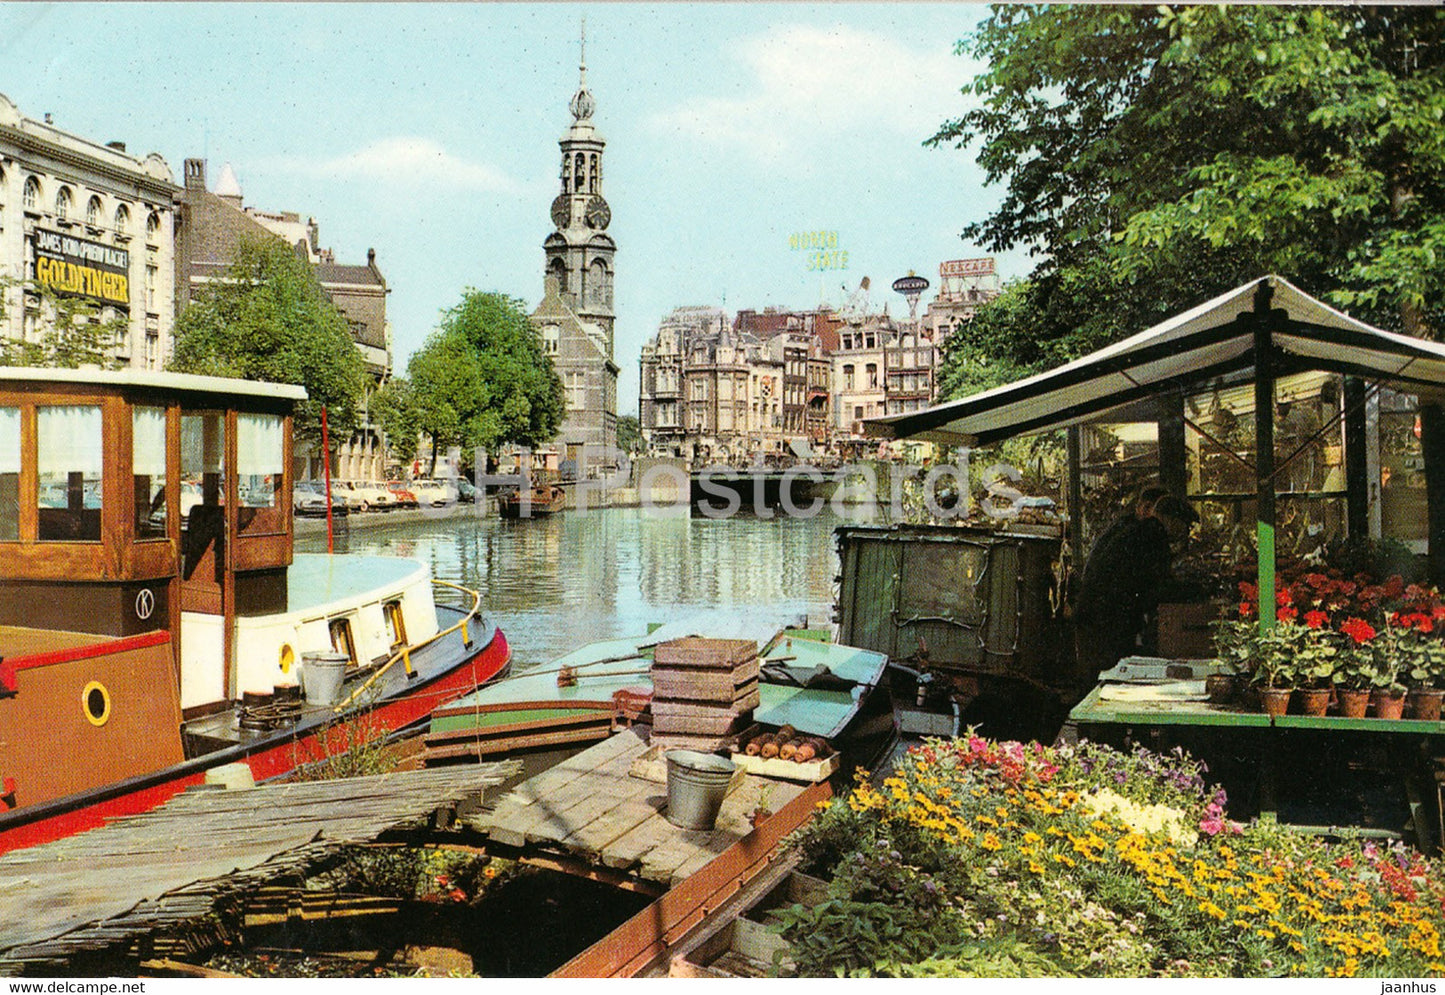 Amsterdam - The Floating Flower Market of the Singel near the Mint Tower - boat - Netherlands - unused - JH Postcards